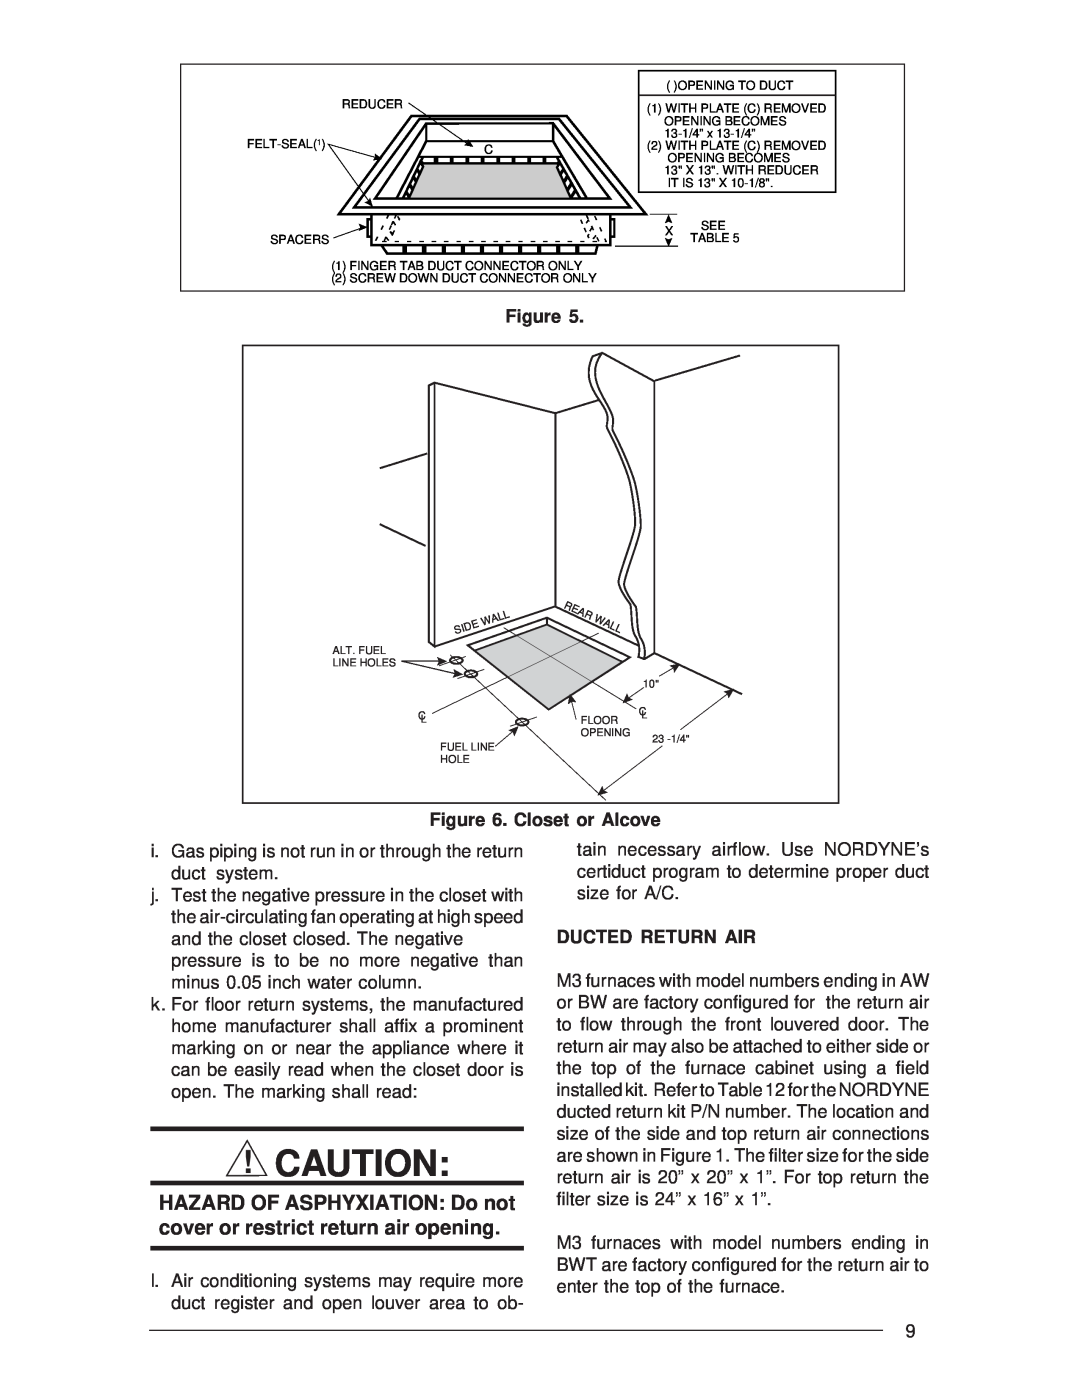 Nordyne M3RL Series installation instructions Closet or Alcove, Ducted Return Air 